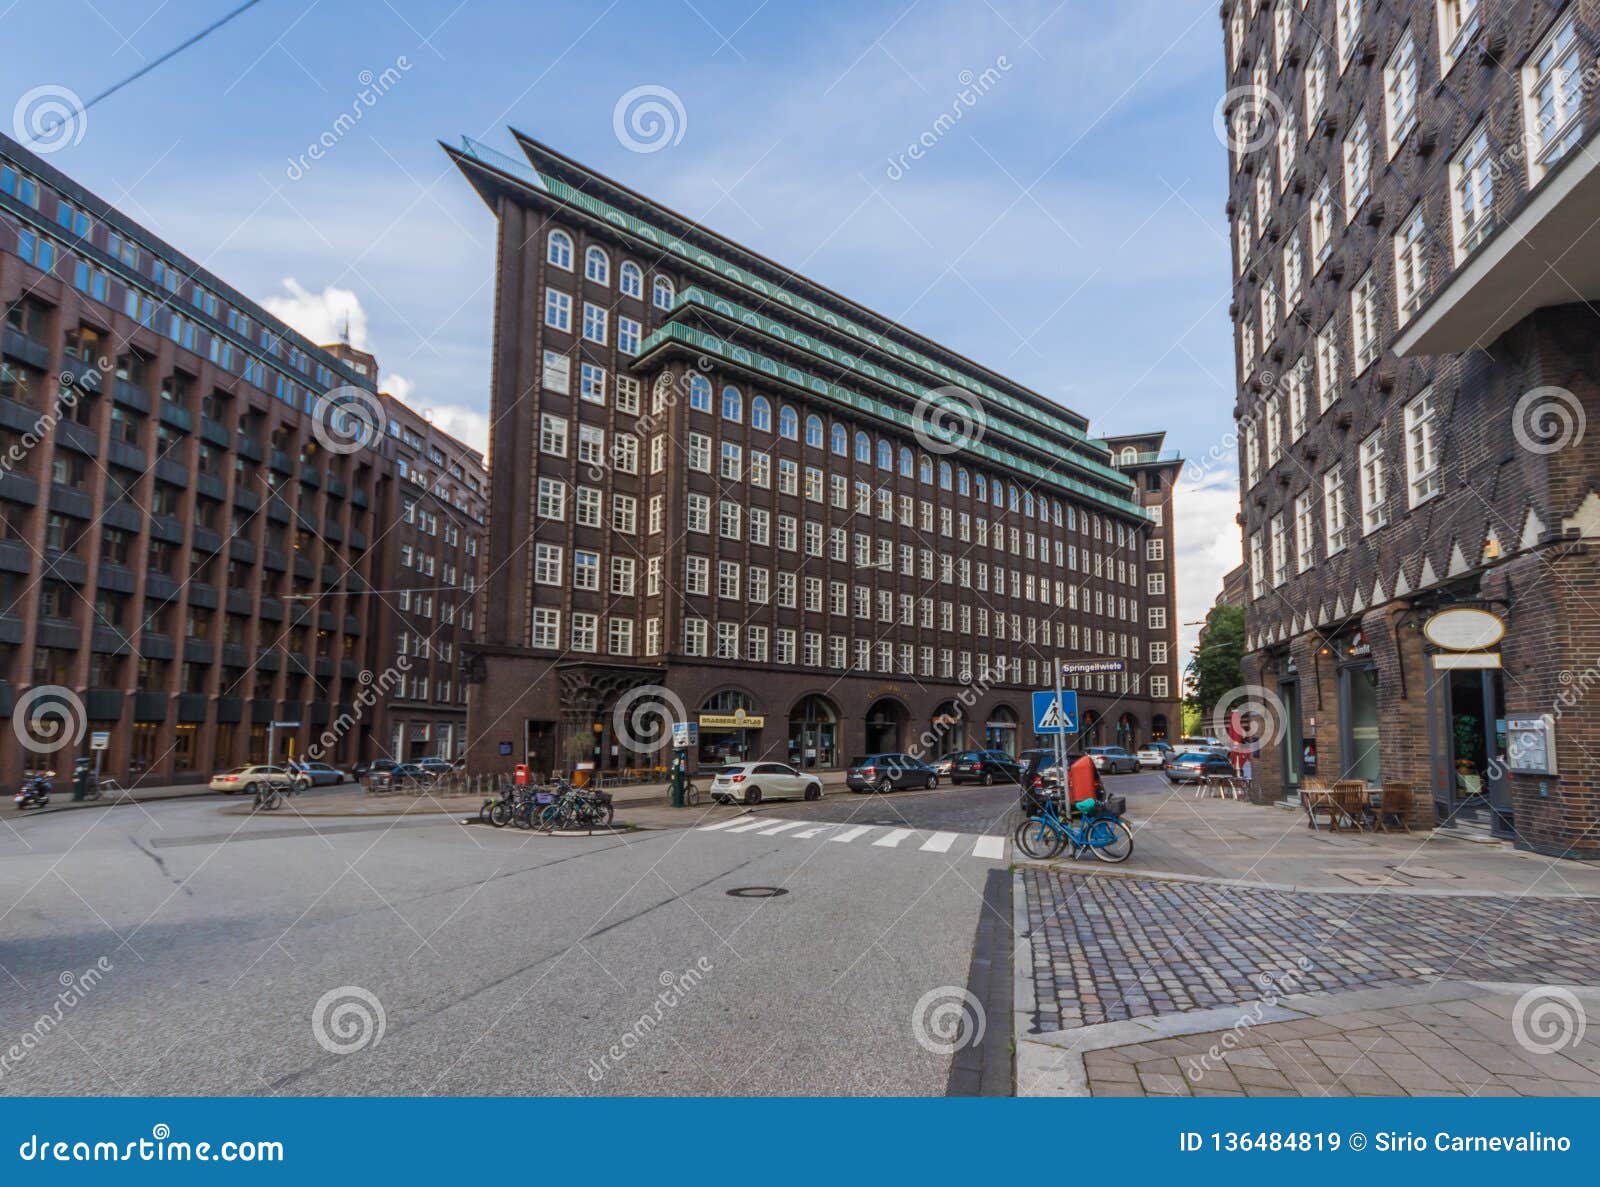 The Chilehaus Office Complex Hamburg Editorial Stock Image Image Of Colors Speicherstadt